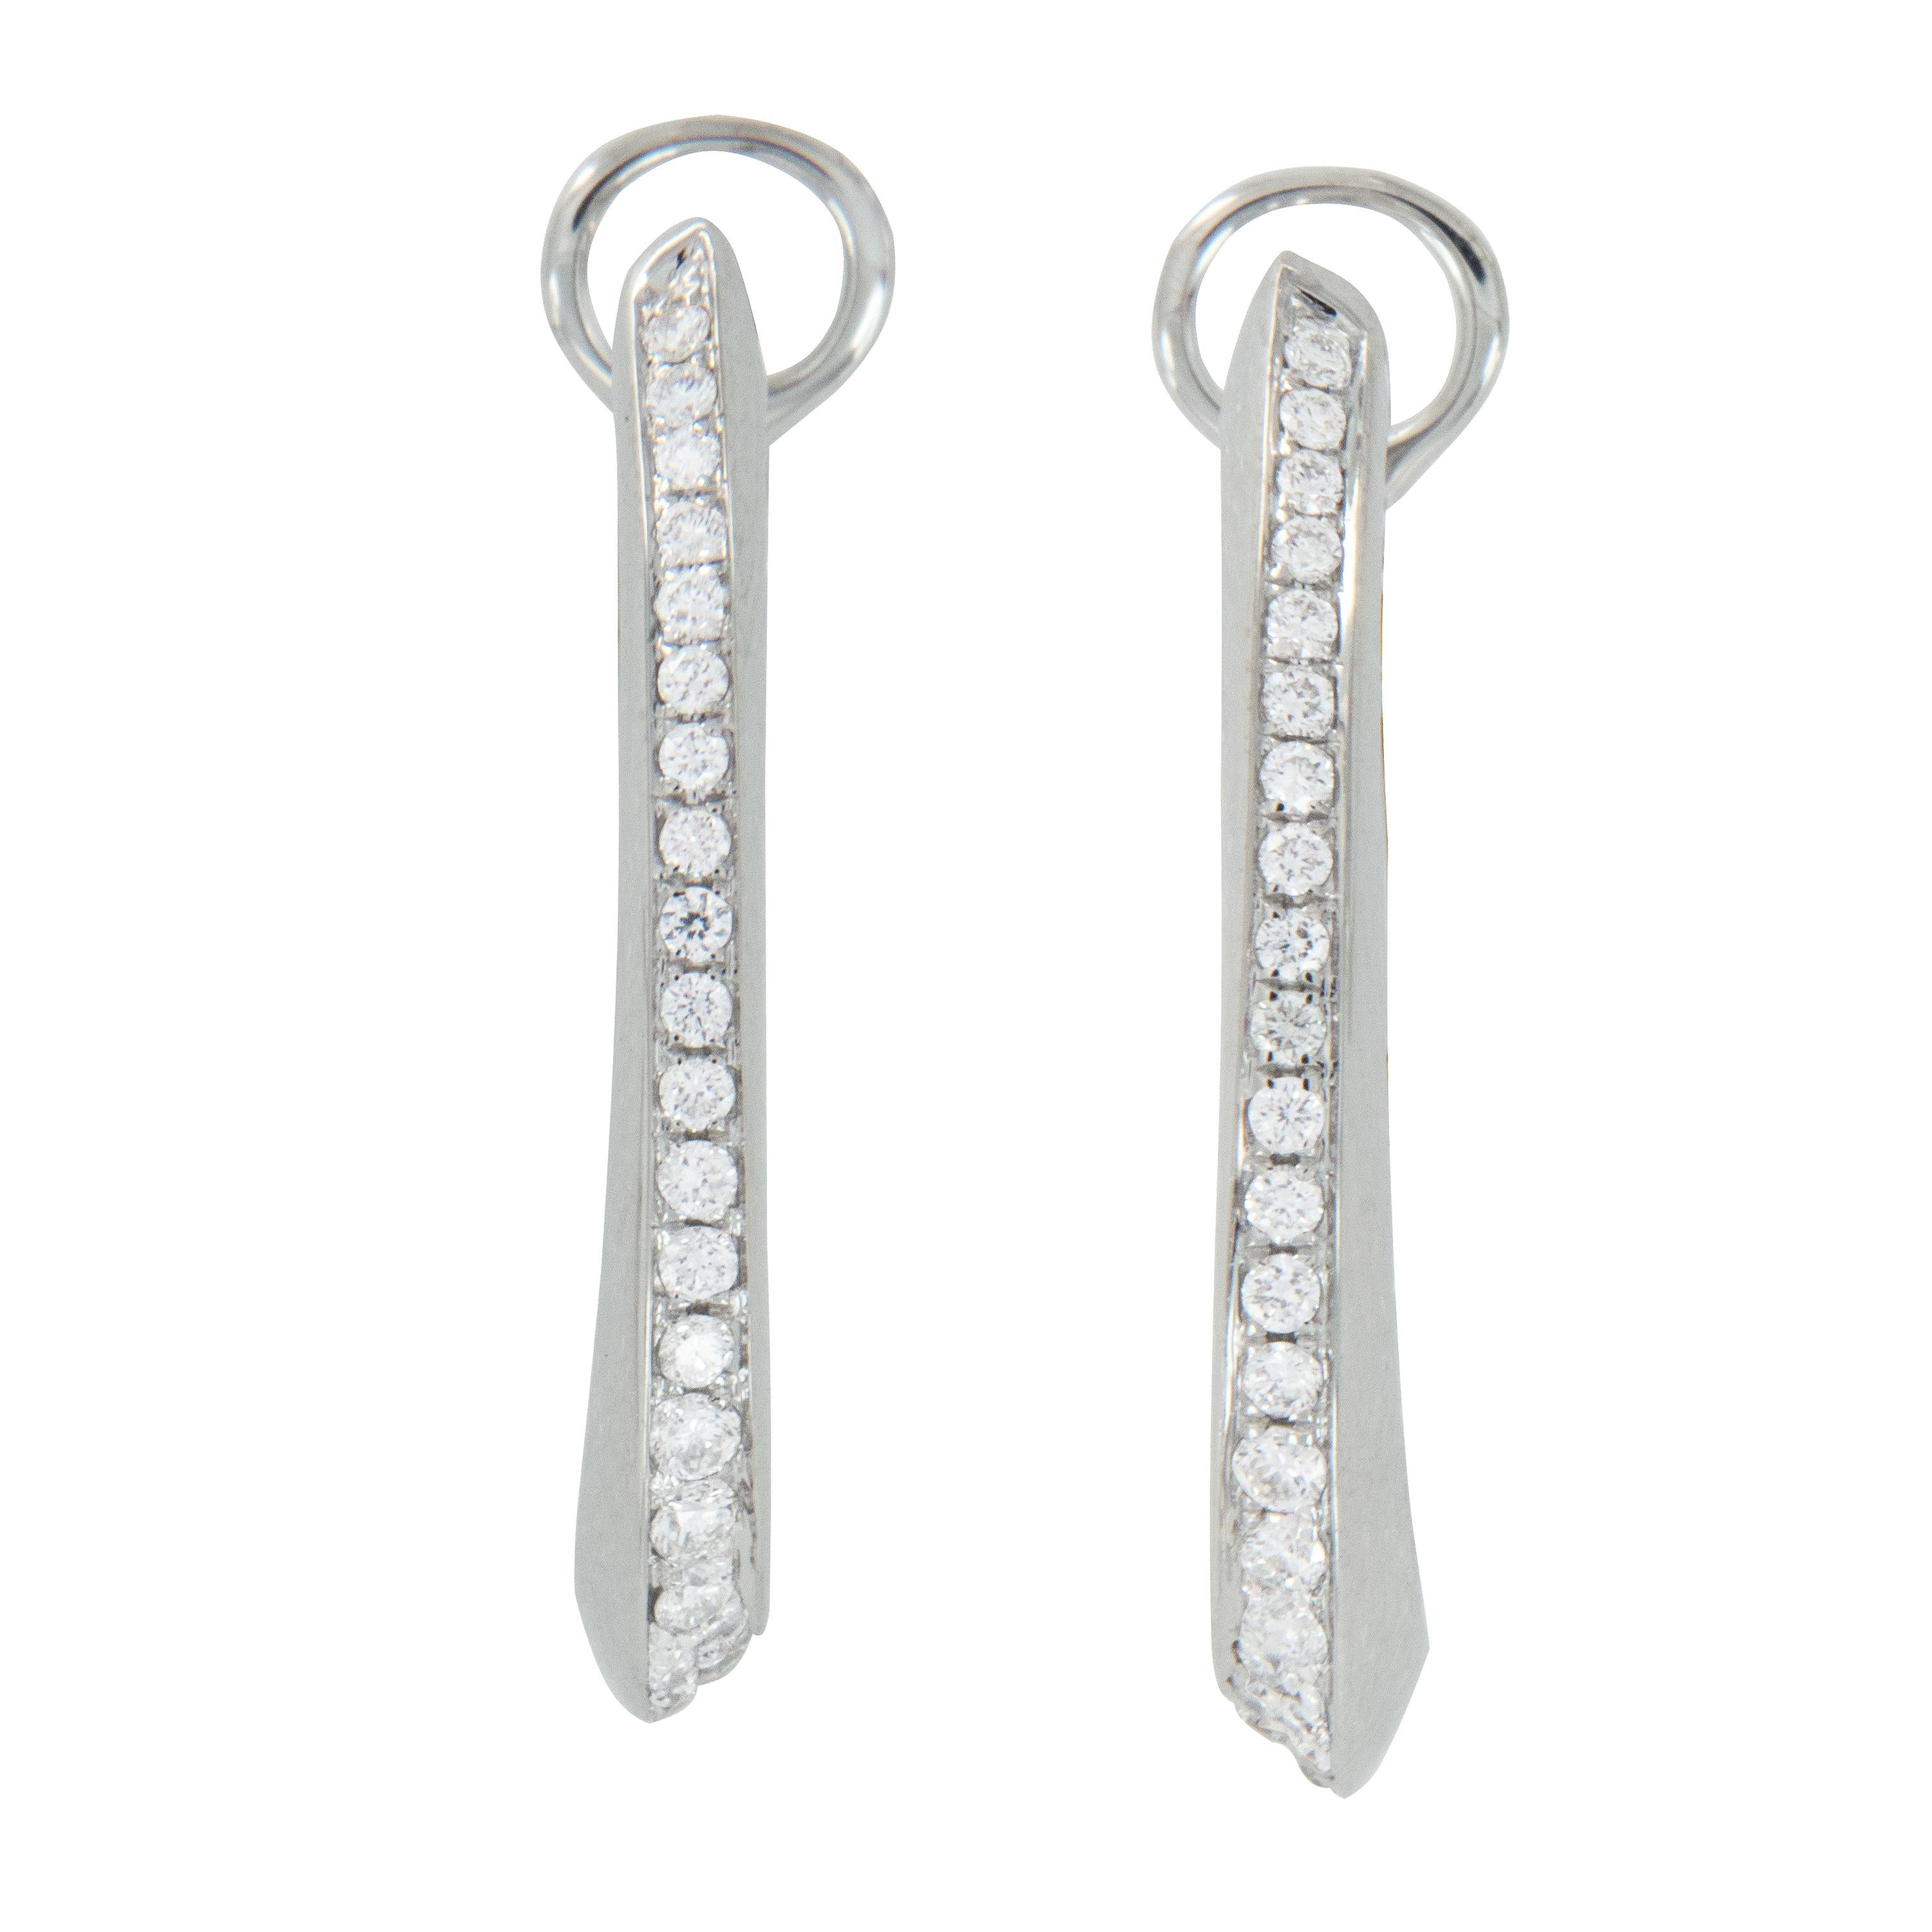 These are the perfect earrings to wear everyday and still be knockouts into the evenings! Made for Campanelli & Pear of fine 18 karat white gold in complimentary oval hoop shape with 0.36 Cttw diamonds pave' set in the ever so slight twist to really